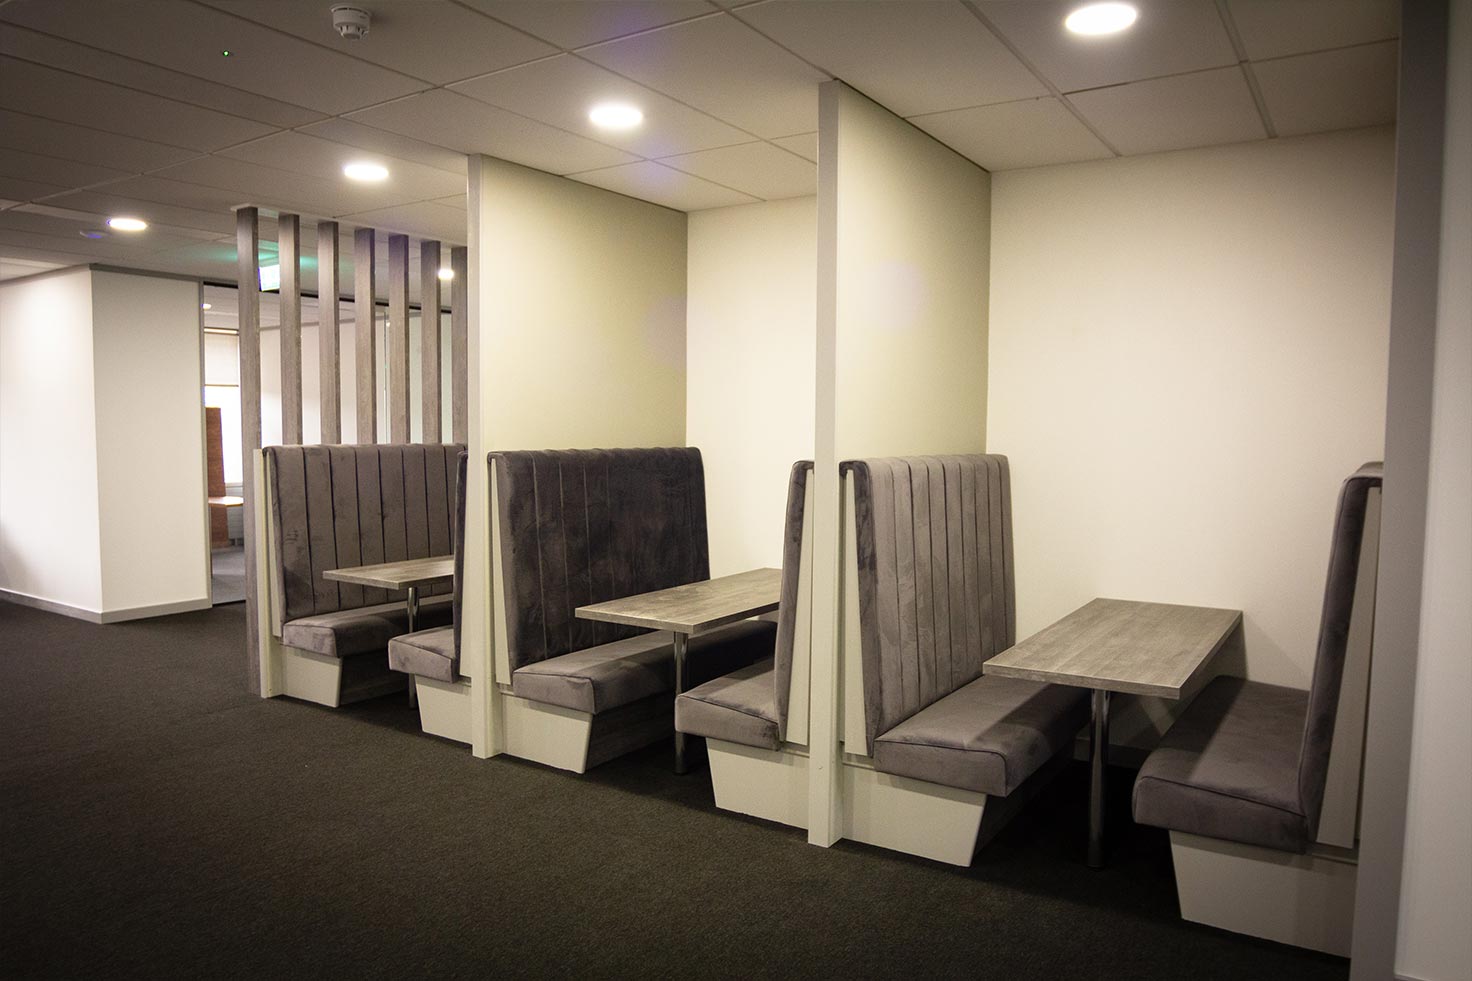 Seating area at Clyde Blowers Capital Ltd - Designed and Installed by Jack Hyams